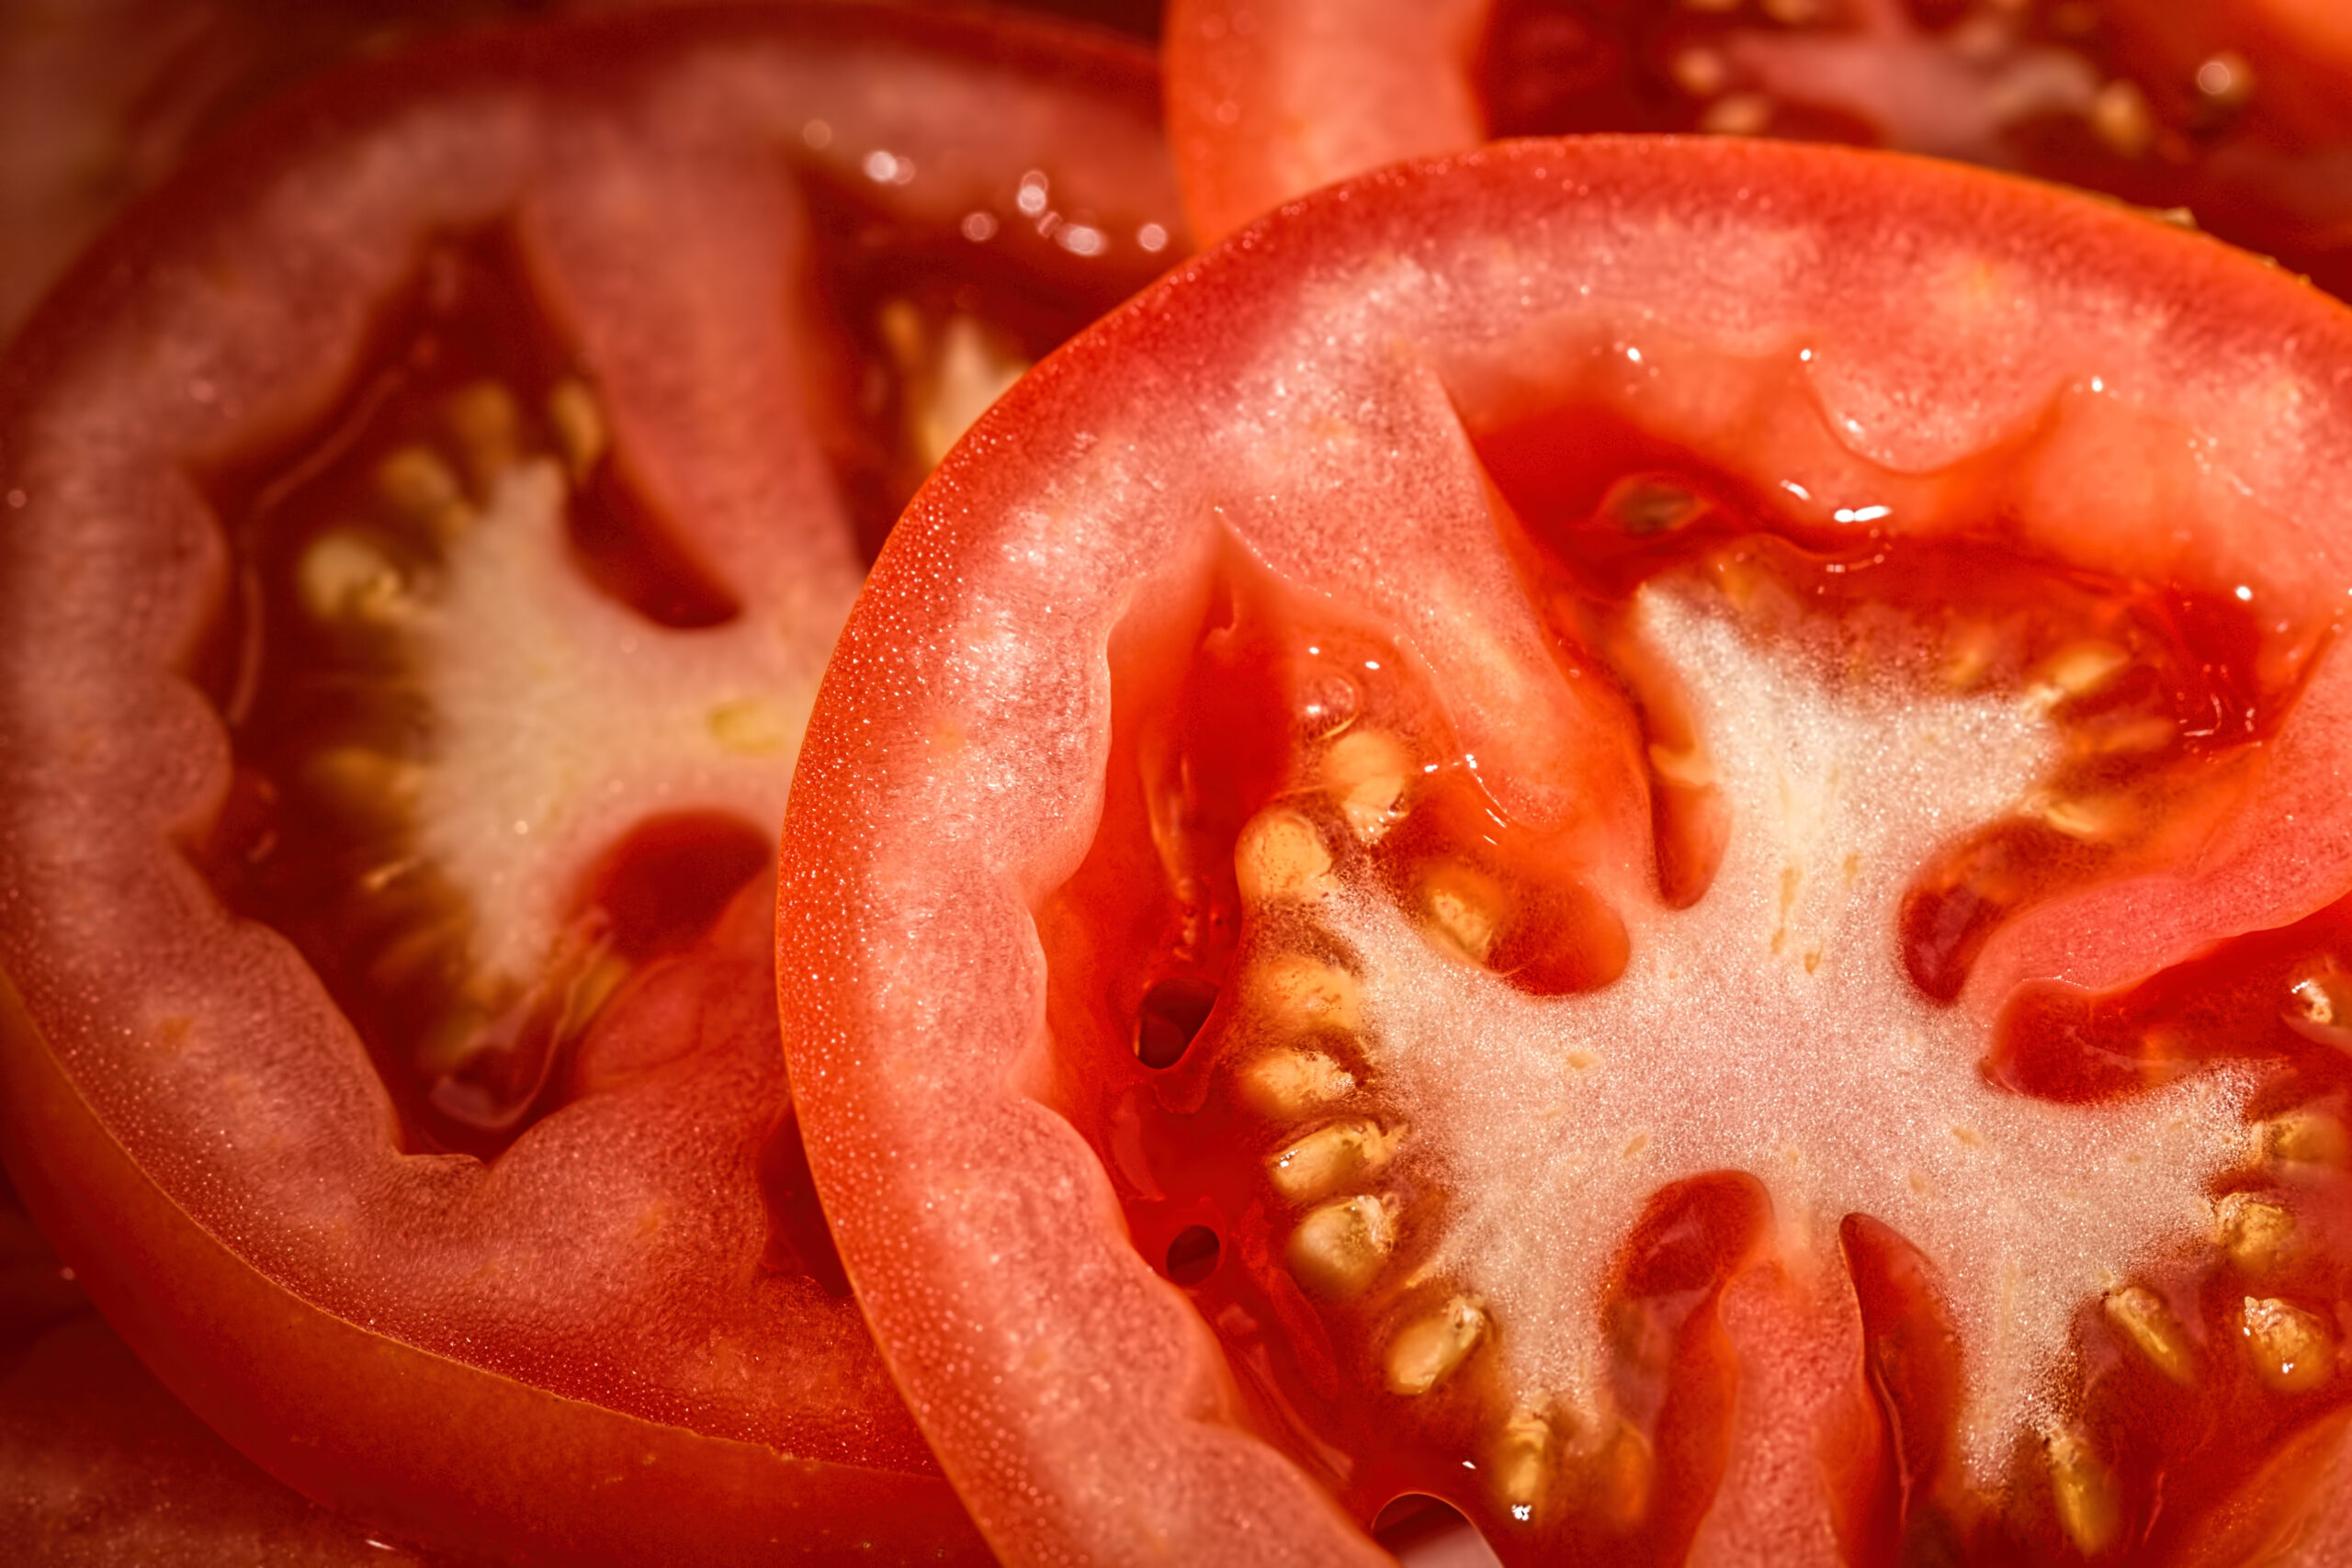 What to Do With Rotten Tomatoes from your Garden